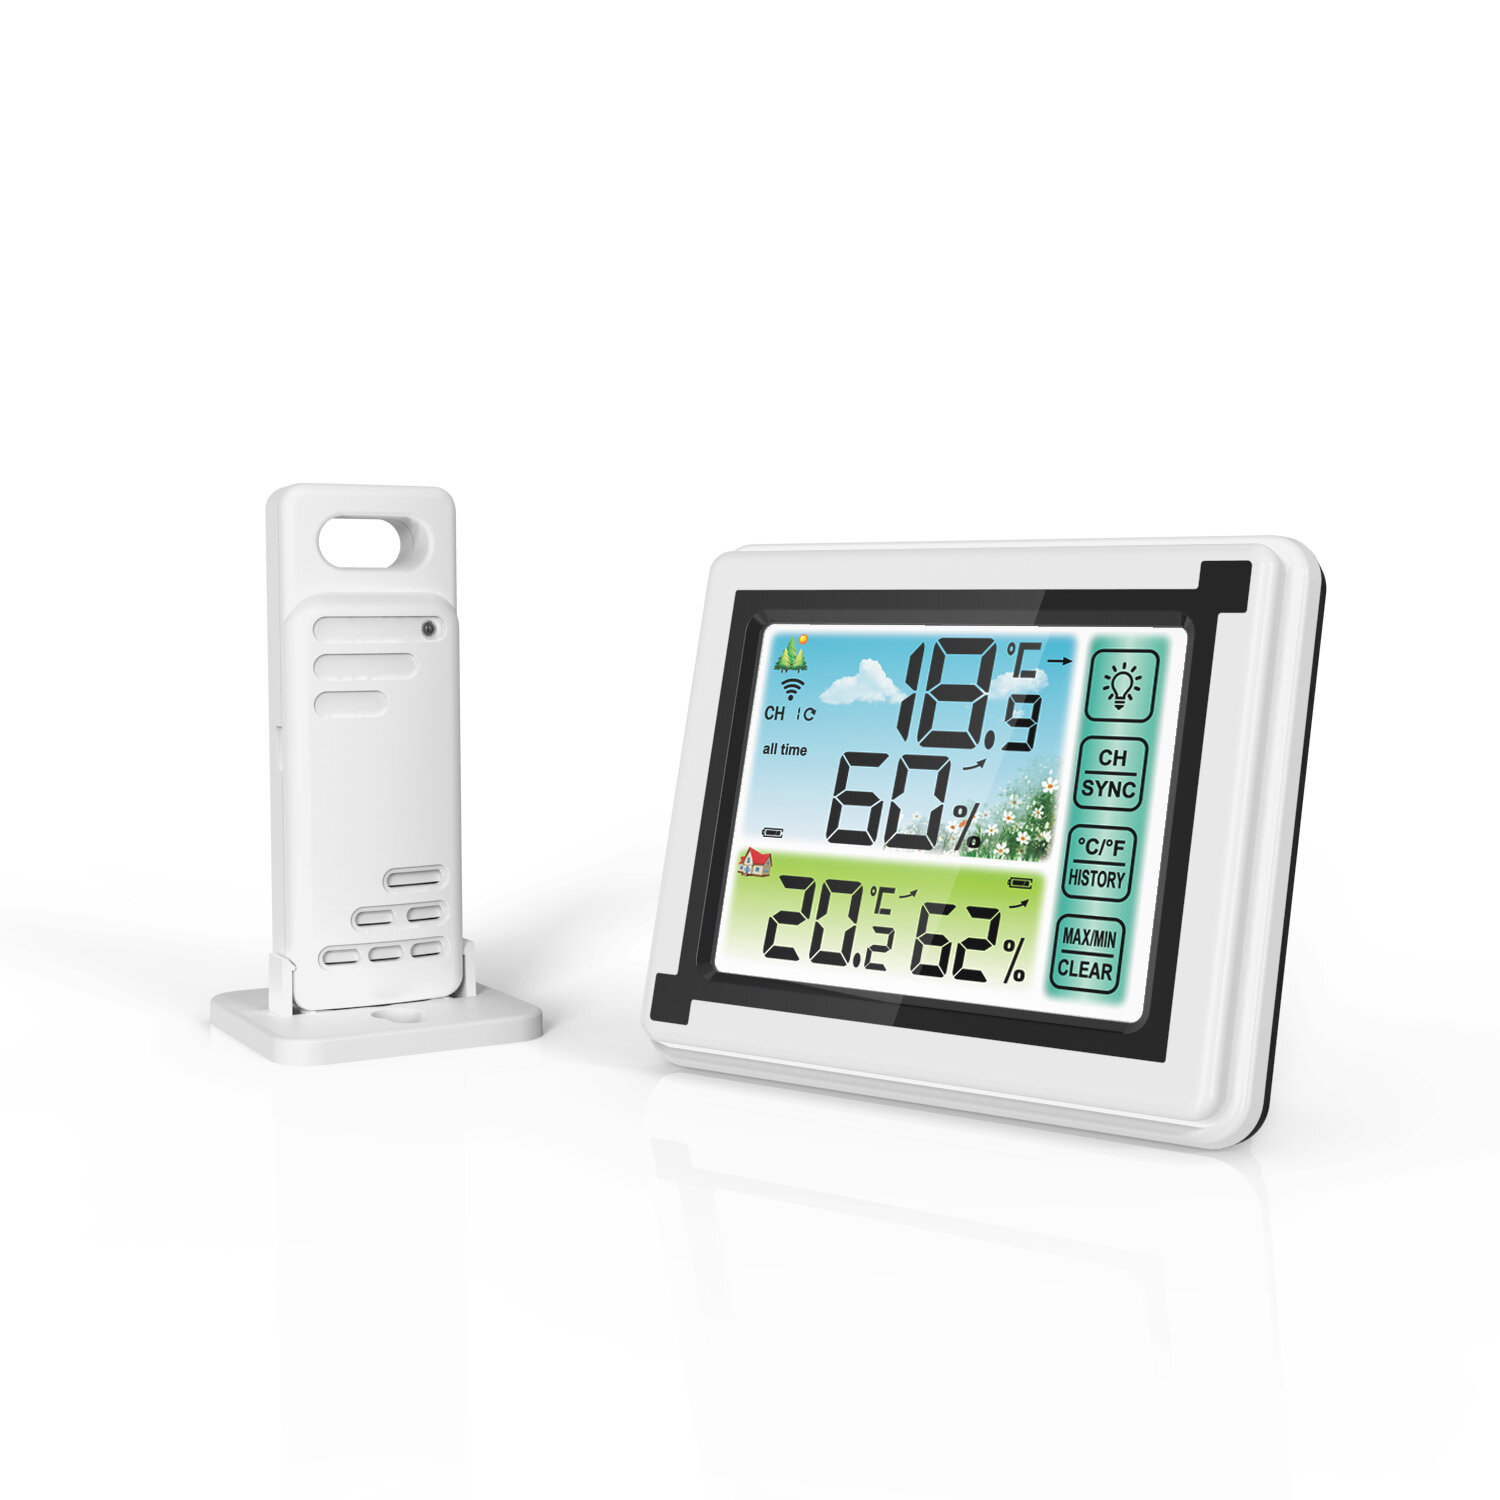 

YUIHome WP6950 433MHz Indoor Outdoor Touch Screen Wireless Weather Station Color LCD HTN Display IPX4 Hygrometer Thermom